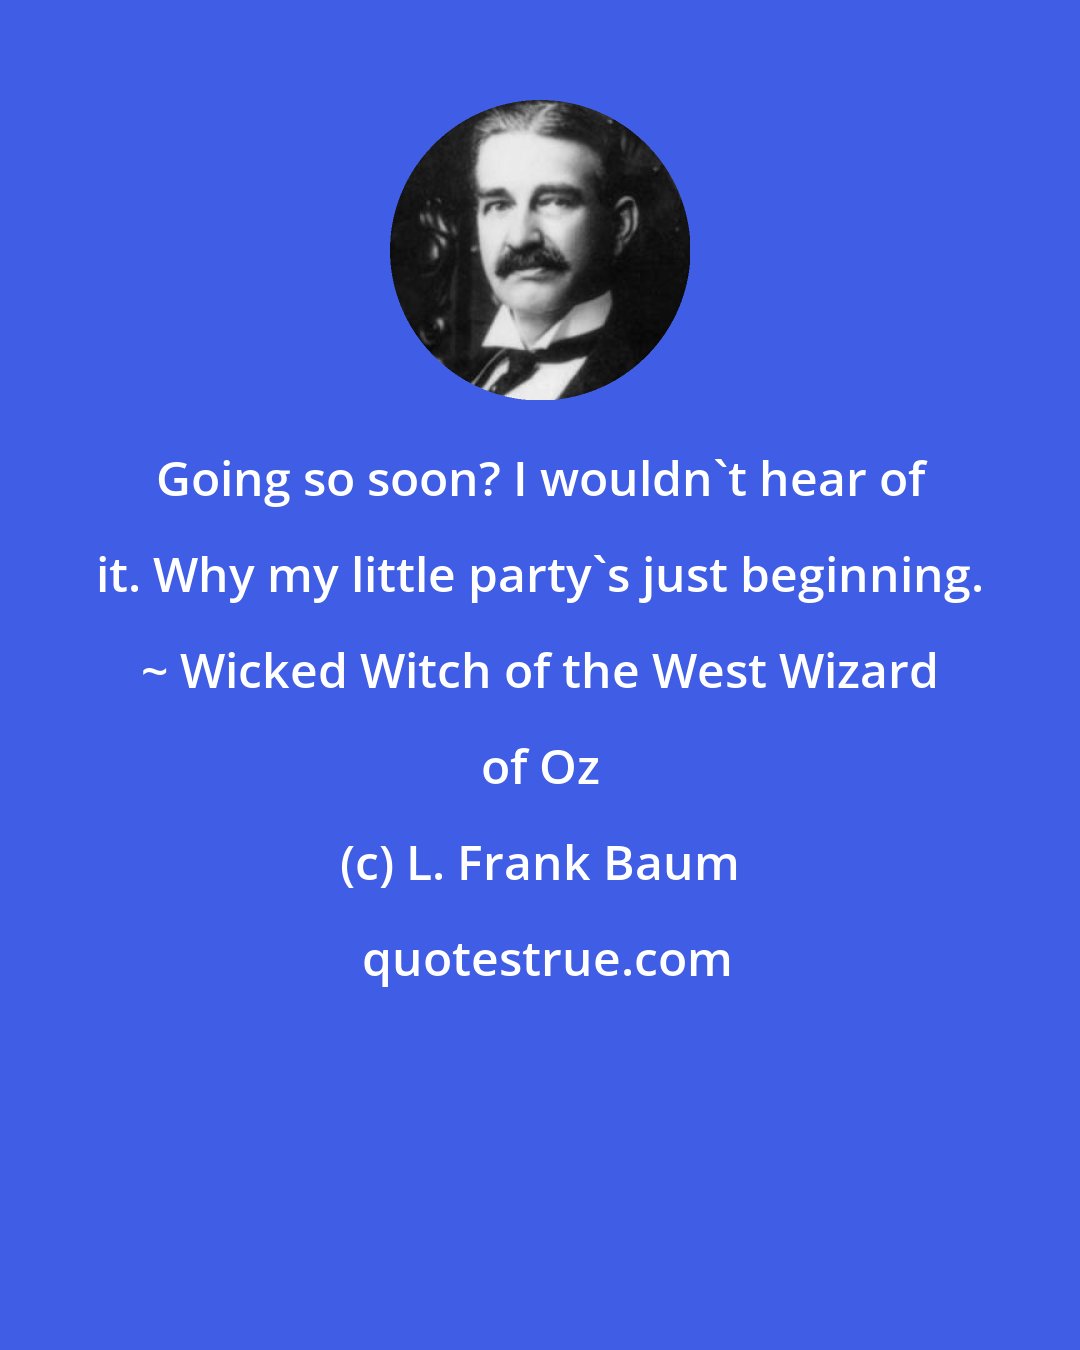 L. Frank Baum: Going so soon? I wouldn't hear of it. Why my little party's just beginning. ~ Wicked Witch of the West Wizard of Oz